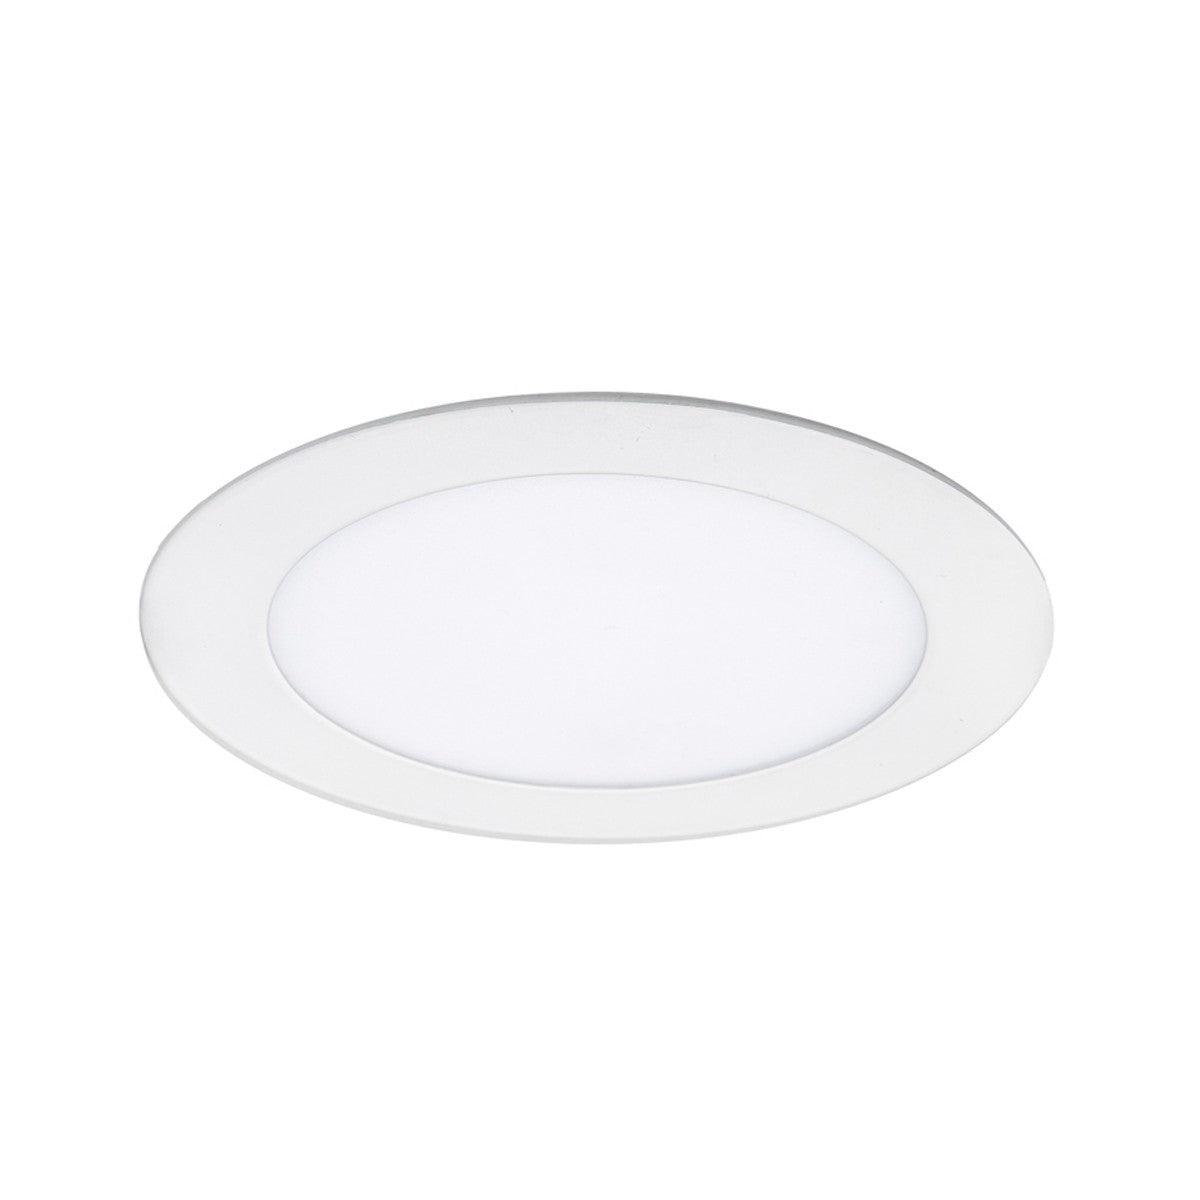 6 In. Wafer-Thin Lotos LED Canless LED Recessed Light, 12 Watt, 1200 Lumens, Selectable CCT, 2700K to 5000K, 120/277V - Bees Lighting